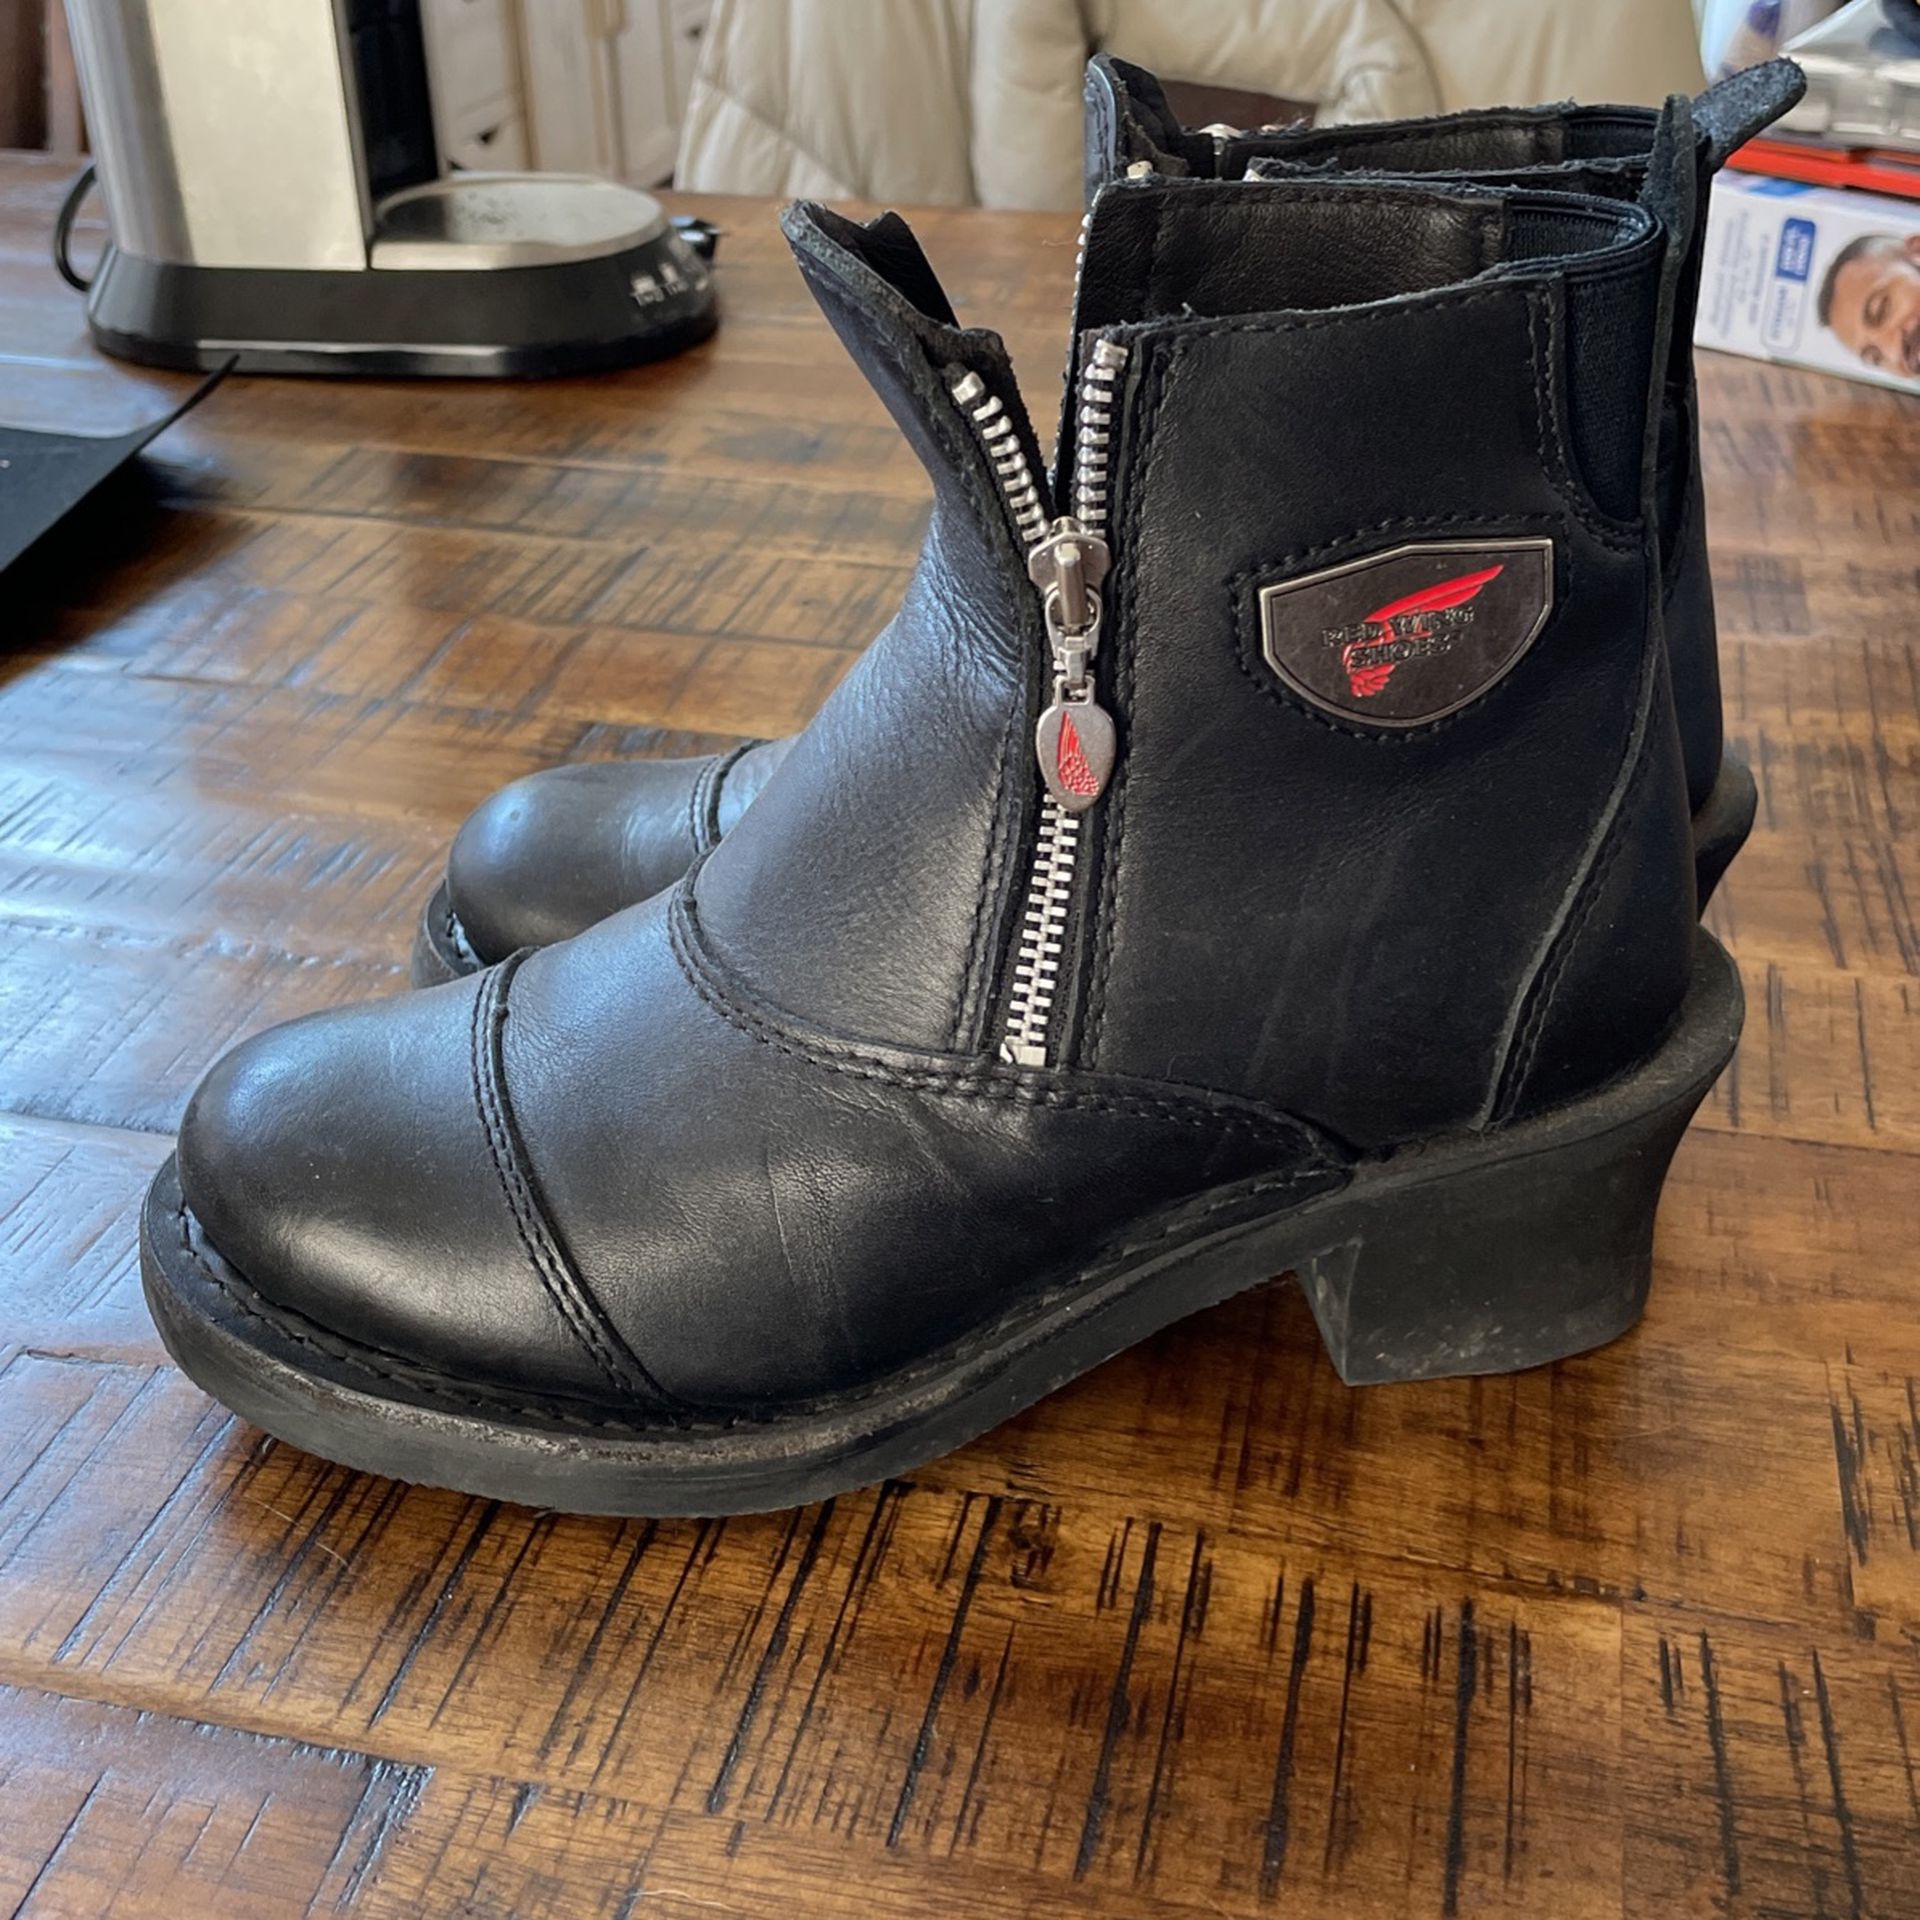 Women’s Redwing Motorcycle Boots